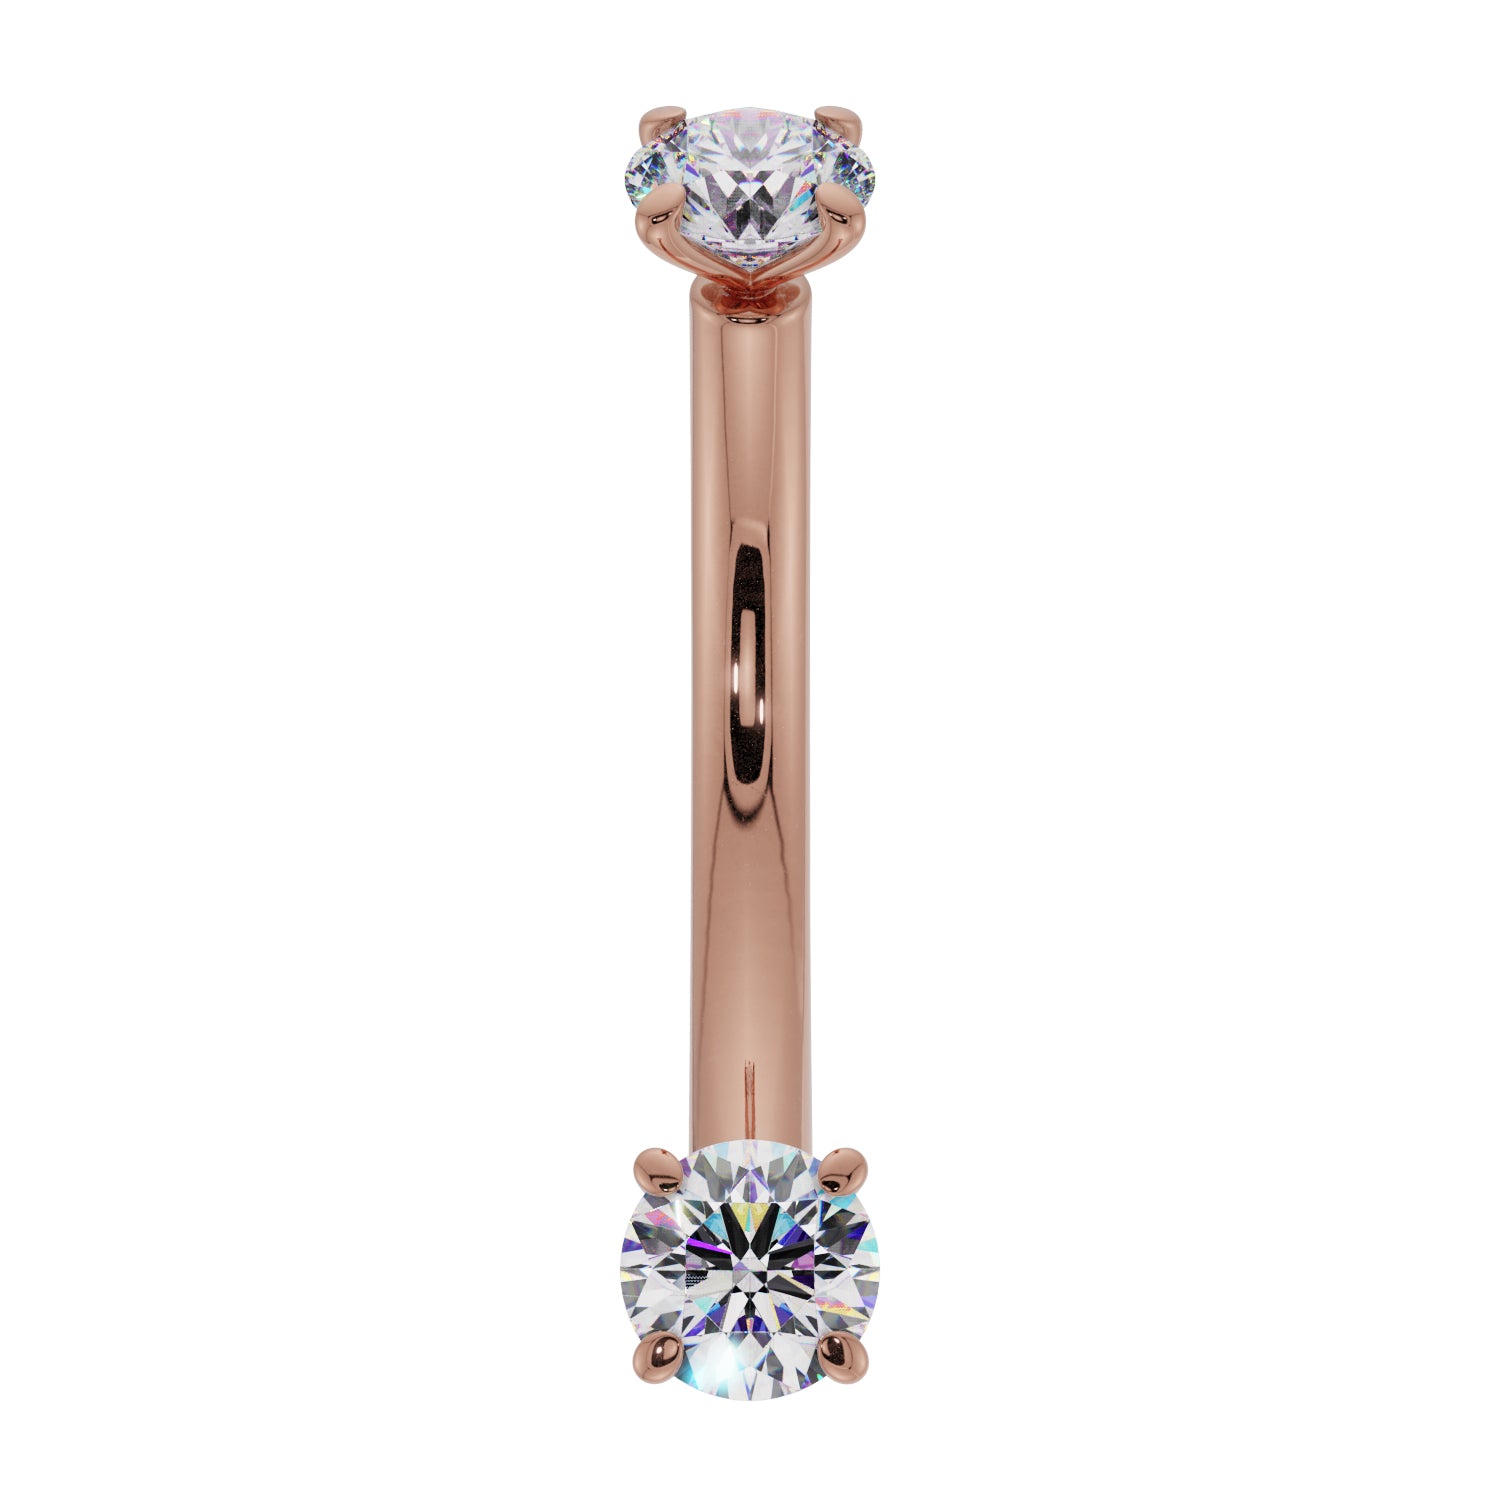 Dainty Diamond Prong-Set Curved Barbell for Eyebrow Rook Belly-14K Rose Gold   16G (1.2mm)   7 16